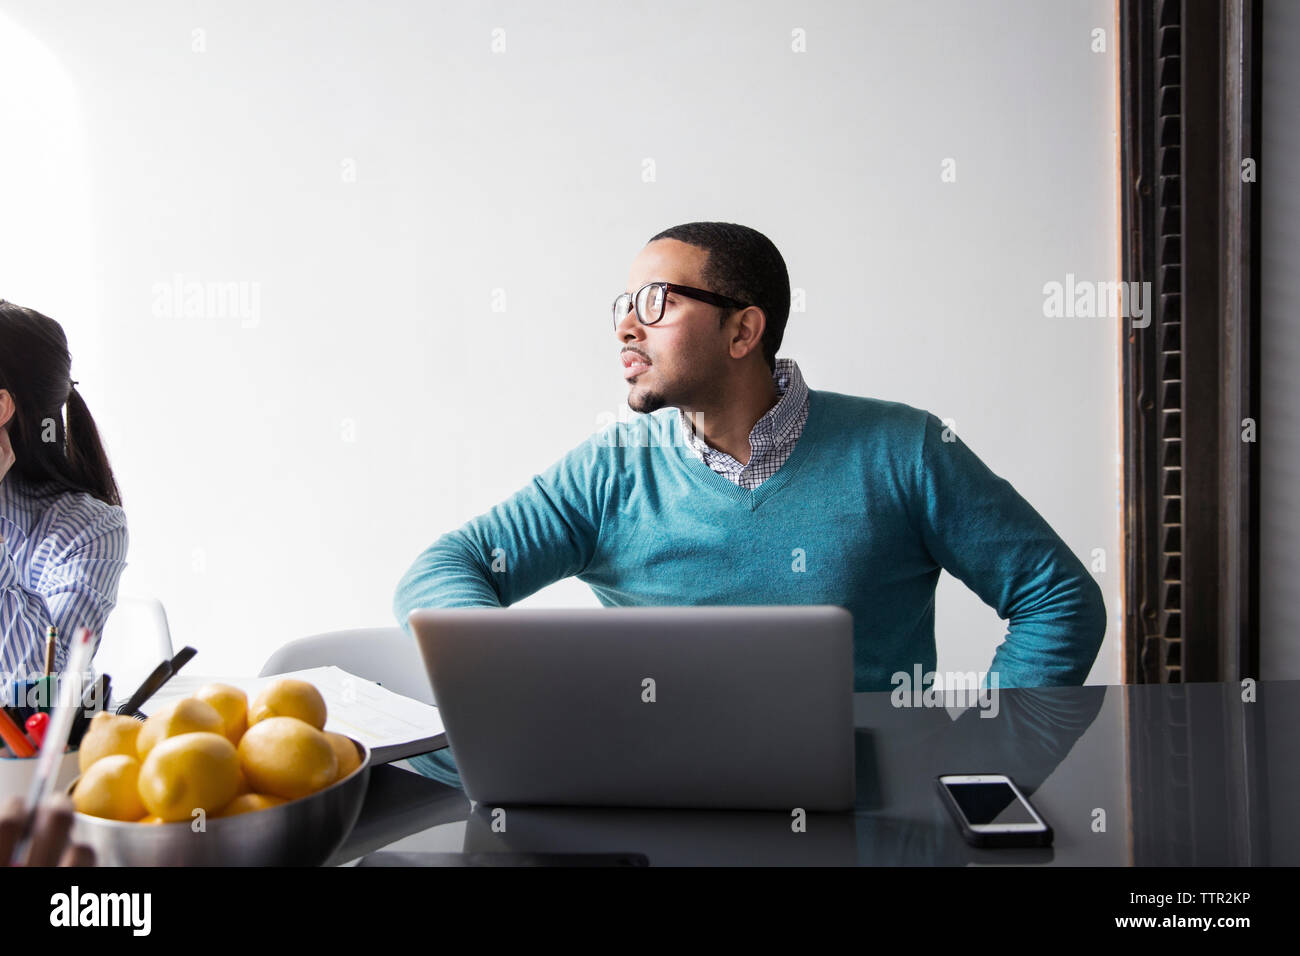 Businessman with laptop concentrating in meeting at office Stock Photo